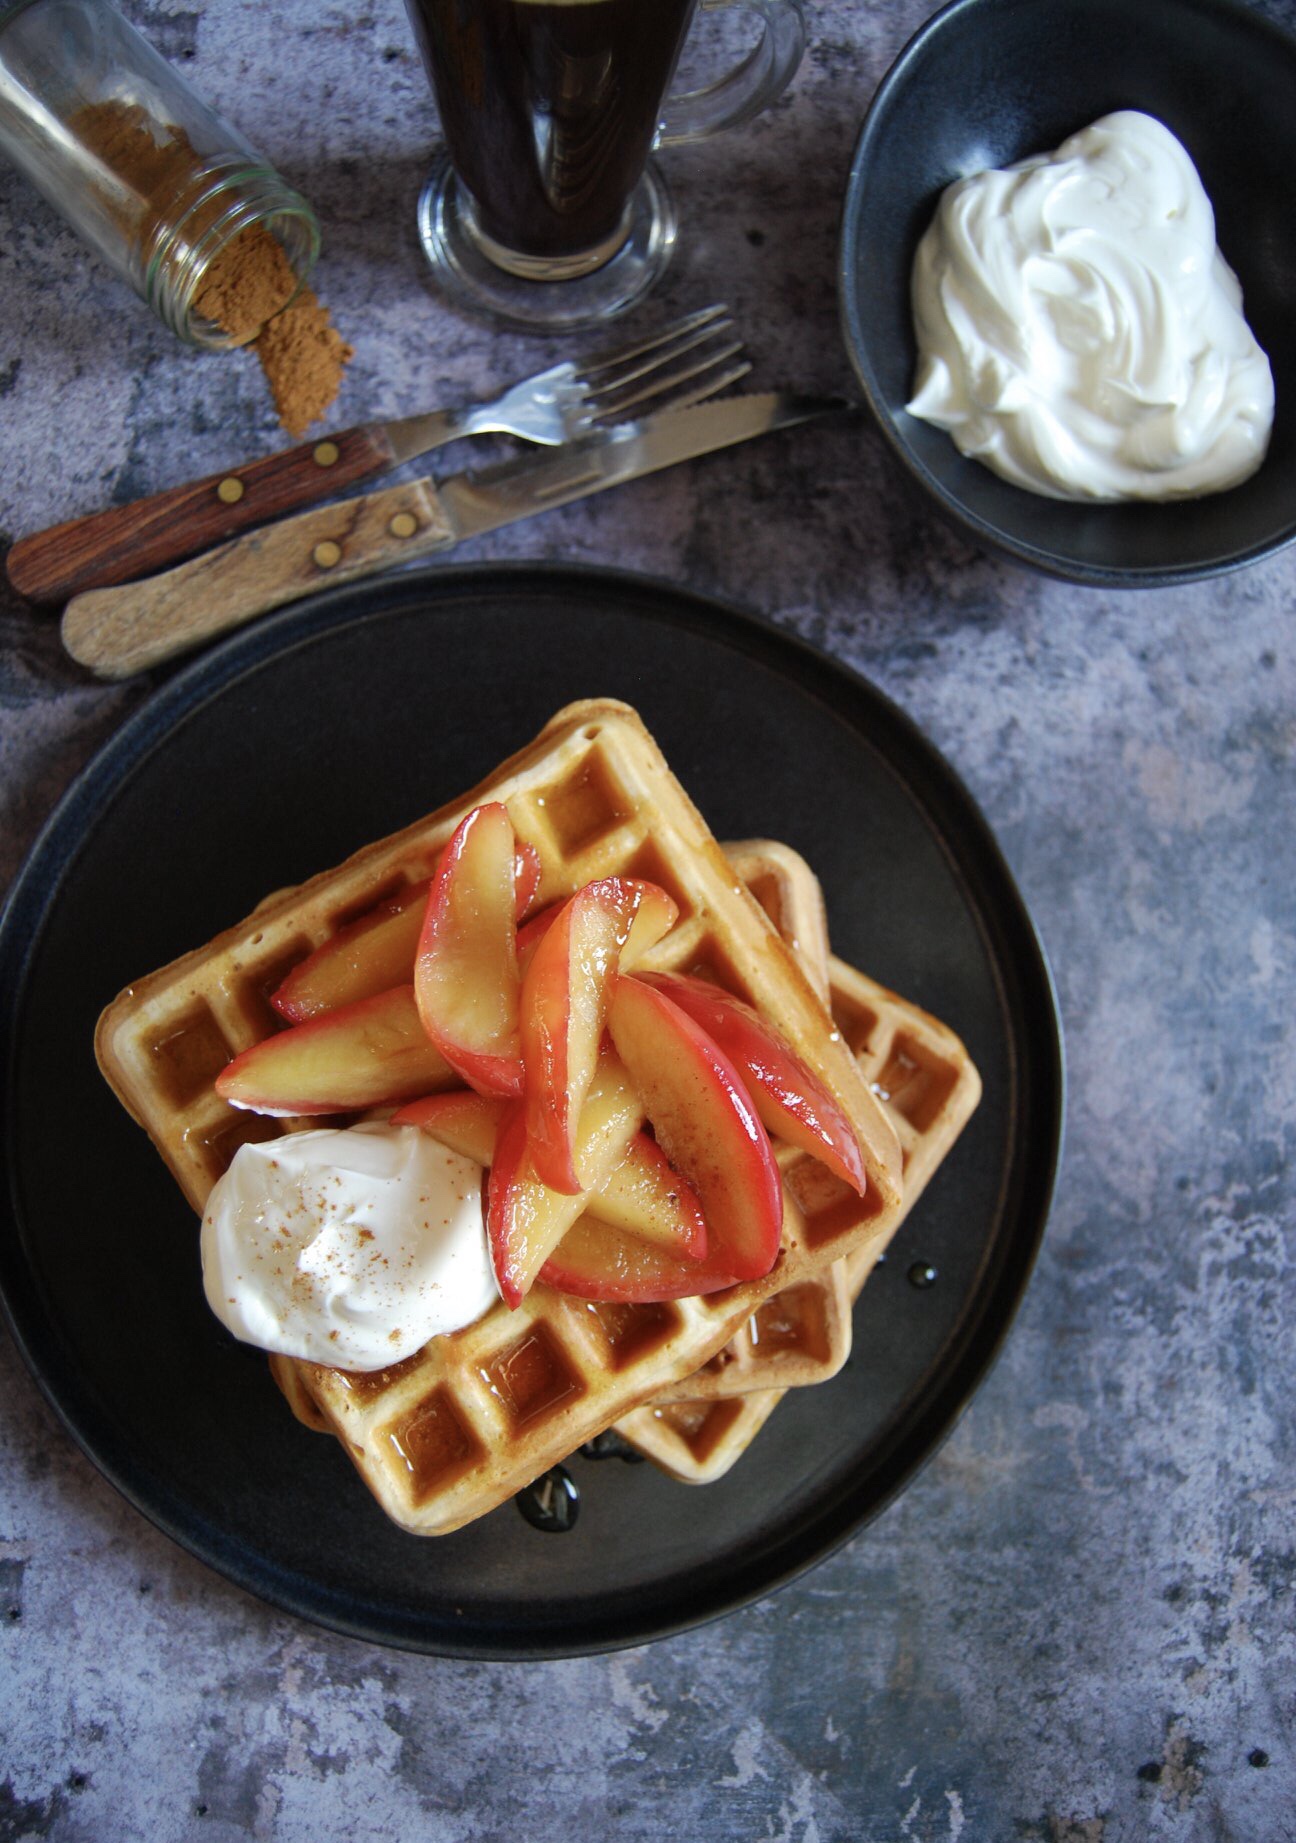 A black plate of waffles topped with apples and greek yoghurt, a wooden handled knife and fork, an upturned pot of cinnamon and a small black bowl of greek yoghurt on a grey background